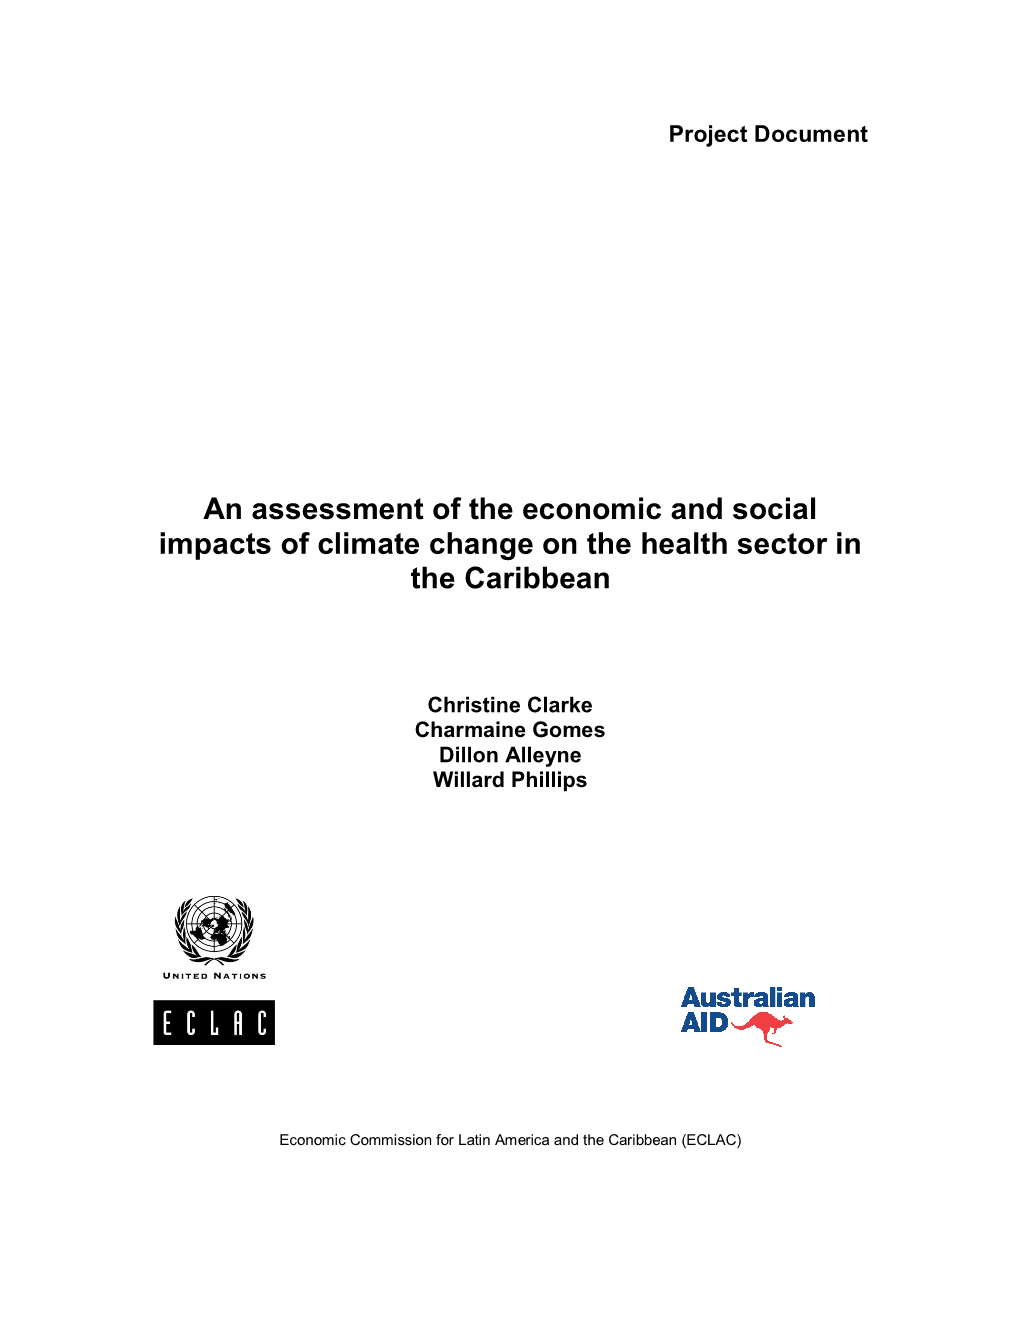 An Assessment of the Economic and Social Impacts of Climate Change on the Health Sector in the Caribbean